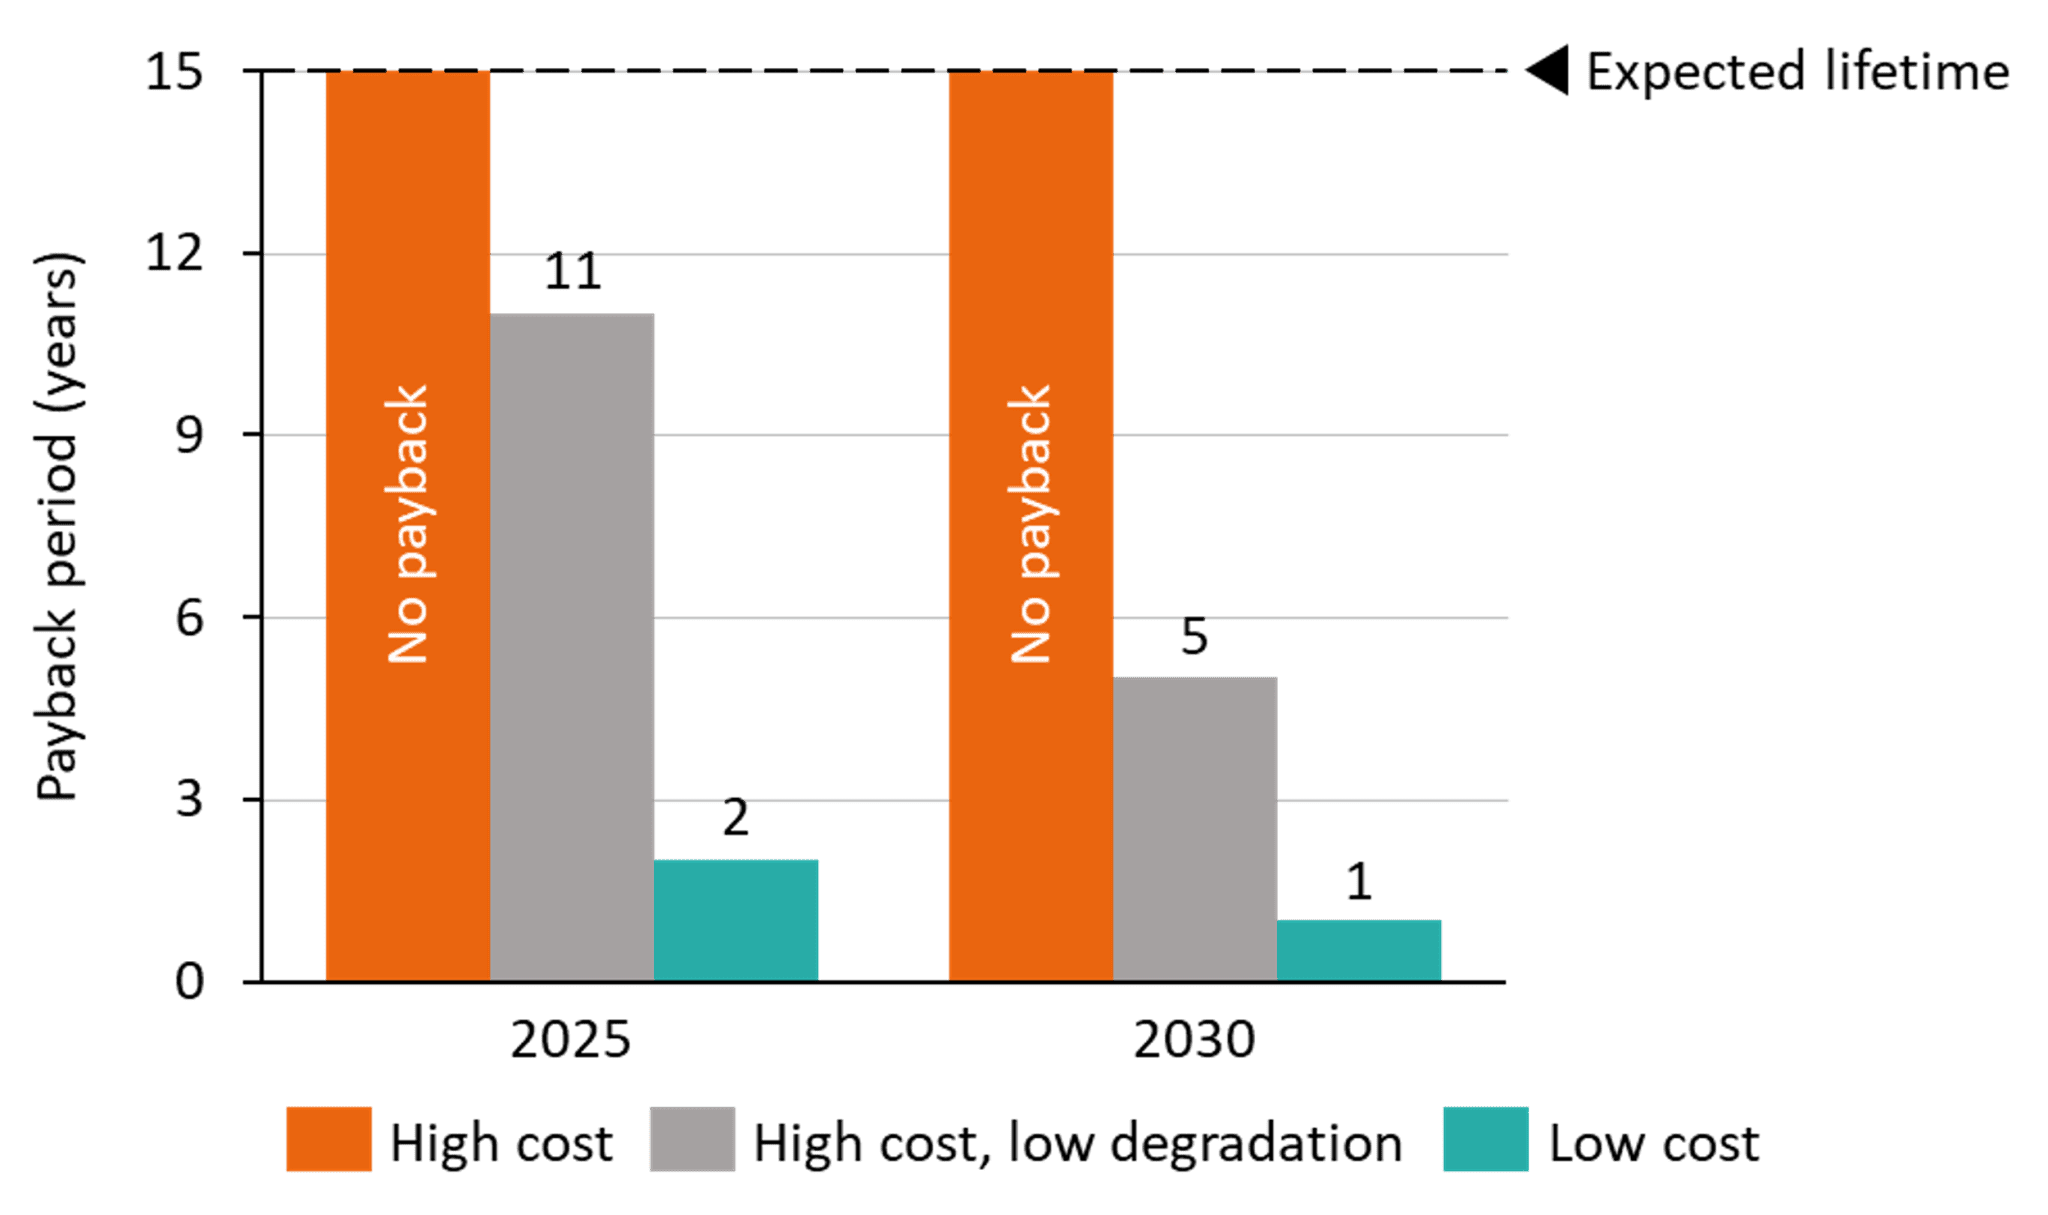 Figure shows the payback period (years) for vans in an urban depot installing V2G solution in 2025 and 2030 over high and low-cost scenarios. Under the low-cost scenario, the investment in V2G is expected to be paid back within 2 years if installed in 2025, and within 1 year if installed in 2030. There is no payback for the V2G solution within the assumed 15-year hardware lifetime under the high-cost scenario in either 2025 or 2030.
Figure additionally shows a sensitivity considering high upfront and ongoing maintenance costs, but low degradation costs. This leads to a payback period of 11 years if installed in 2025, and a payback period of 5 years if installed in 2030.